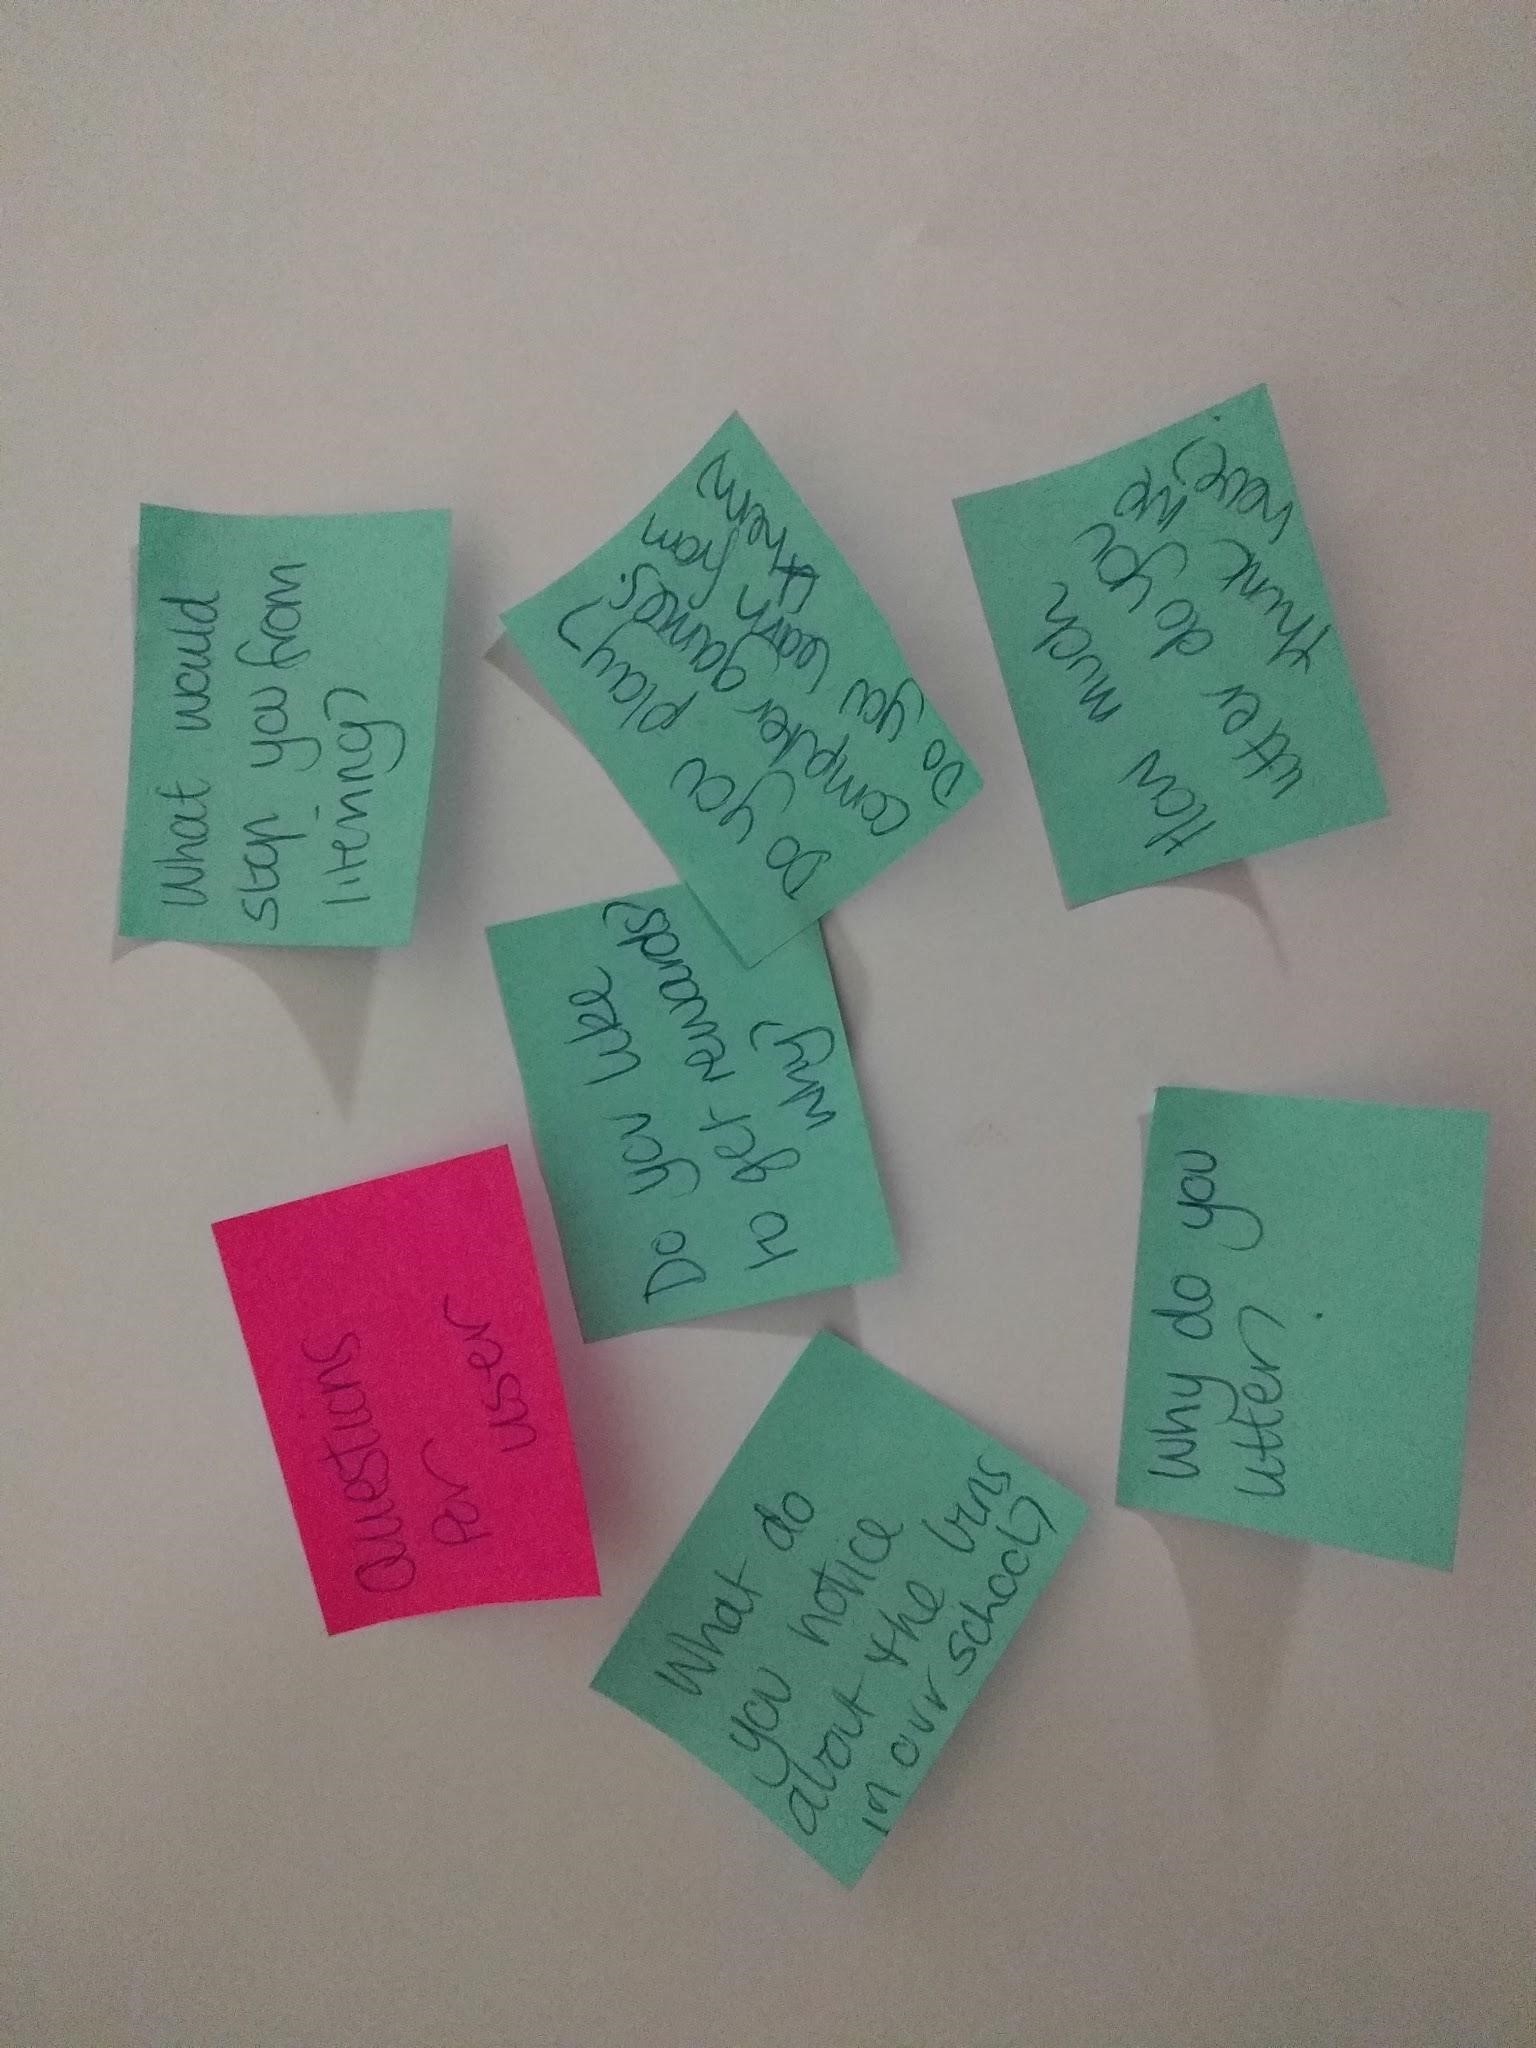 green and pink sticky notes arranged randomly on a board